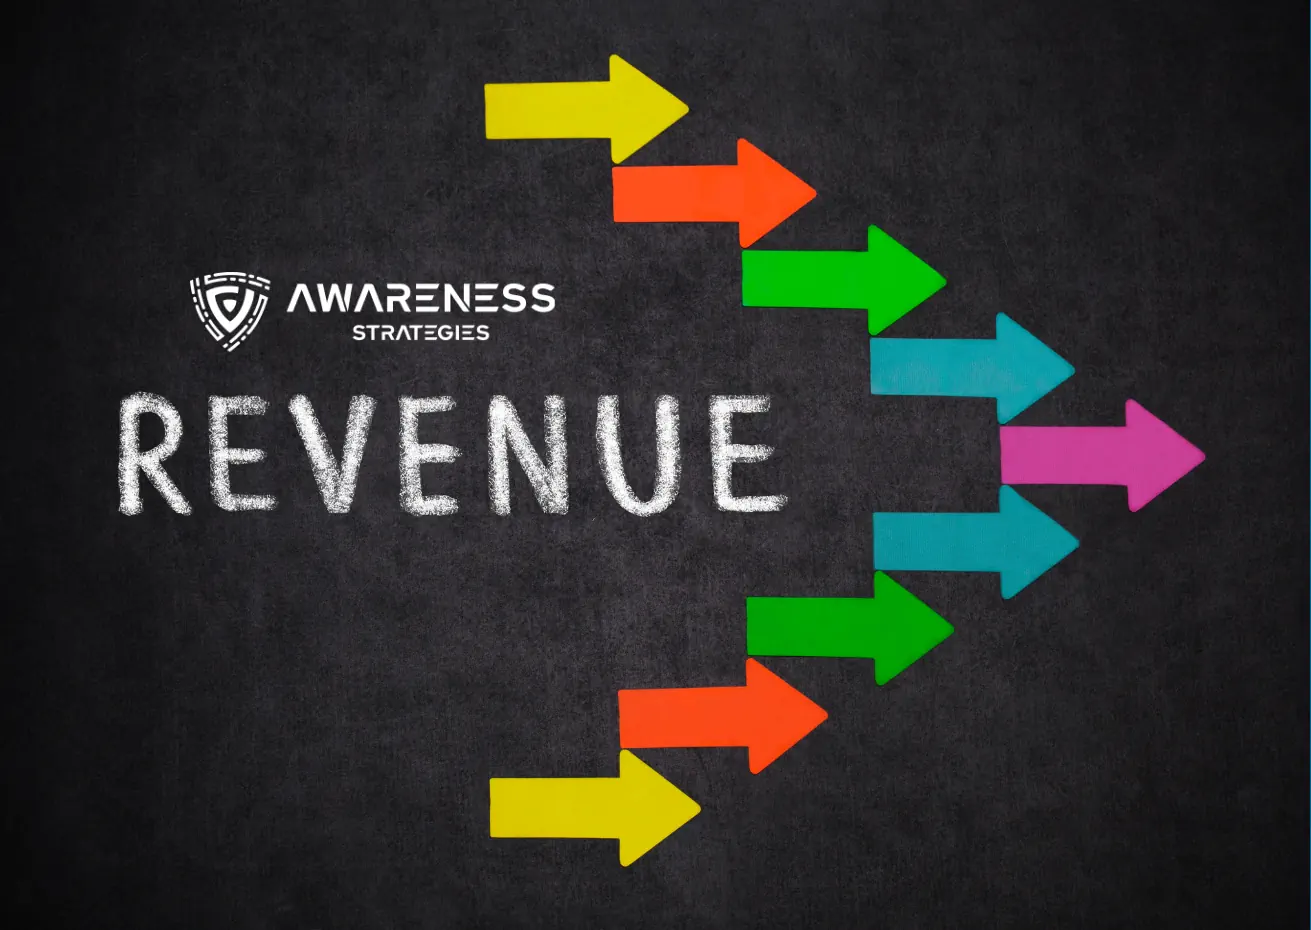 How to Increase Revenue in Business